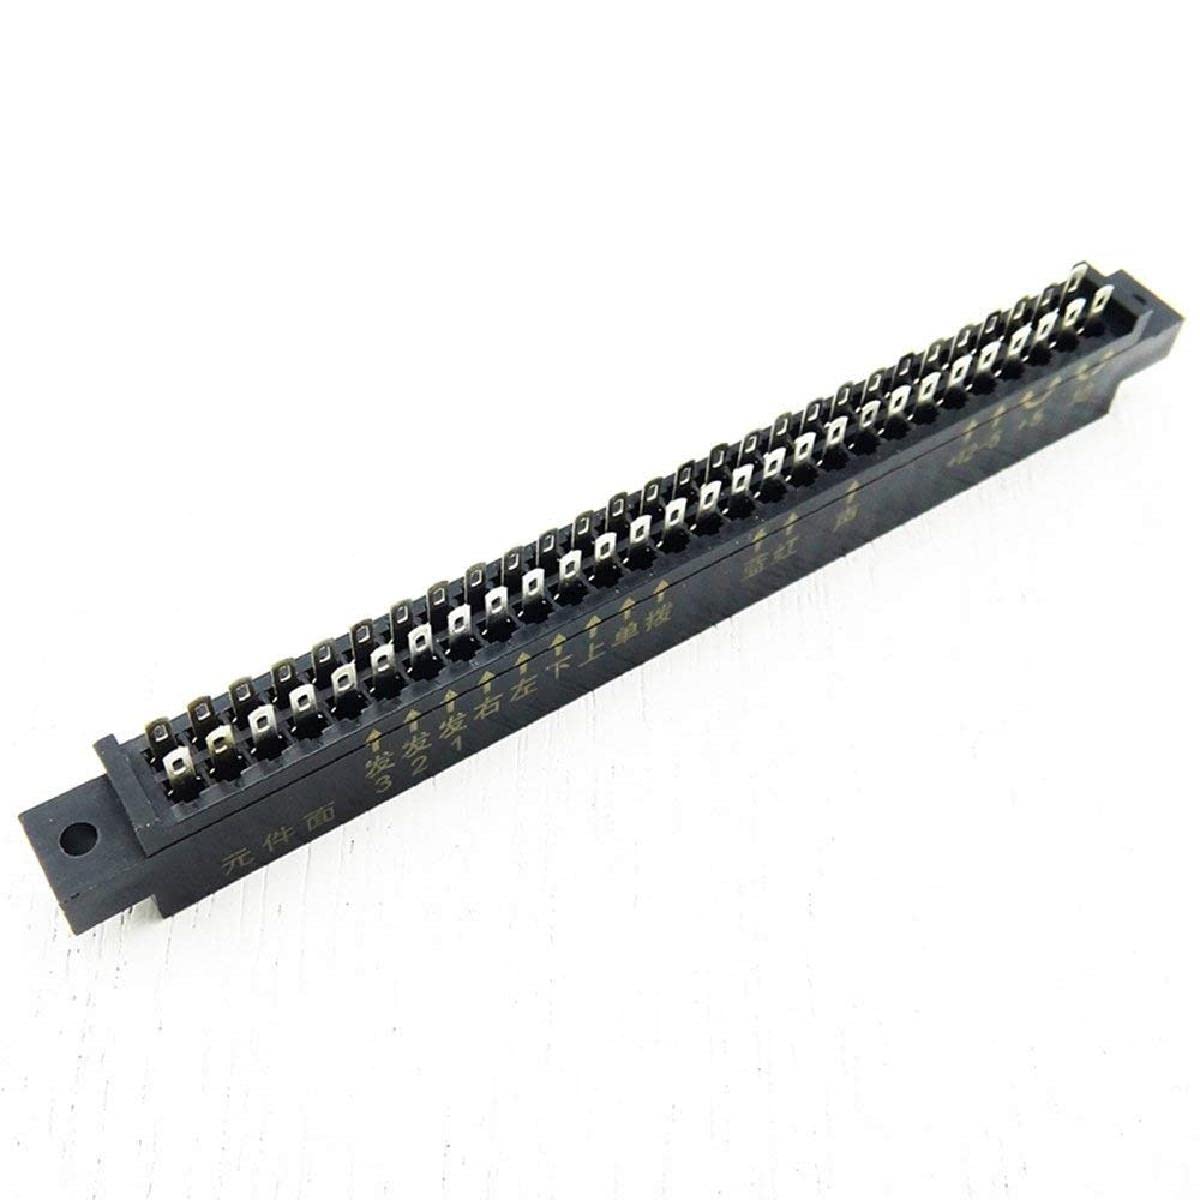 MOUDOAUER 28/56 Pin Female Connector Video Game Parts Arcade Machine Connection Converter Game Accessory